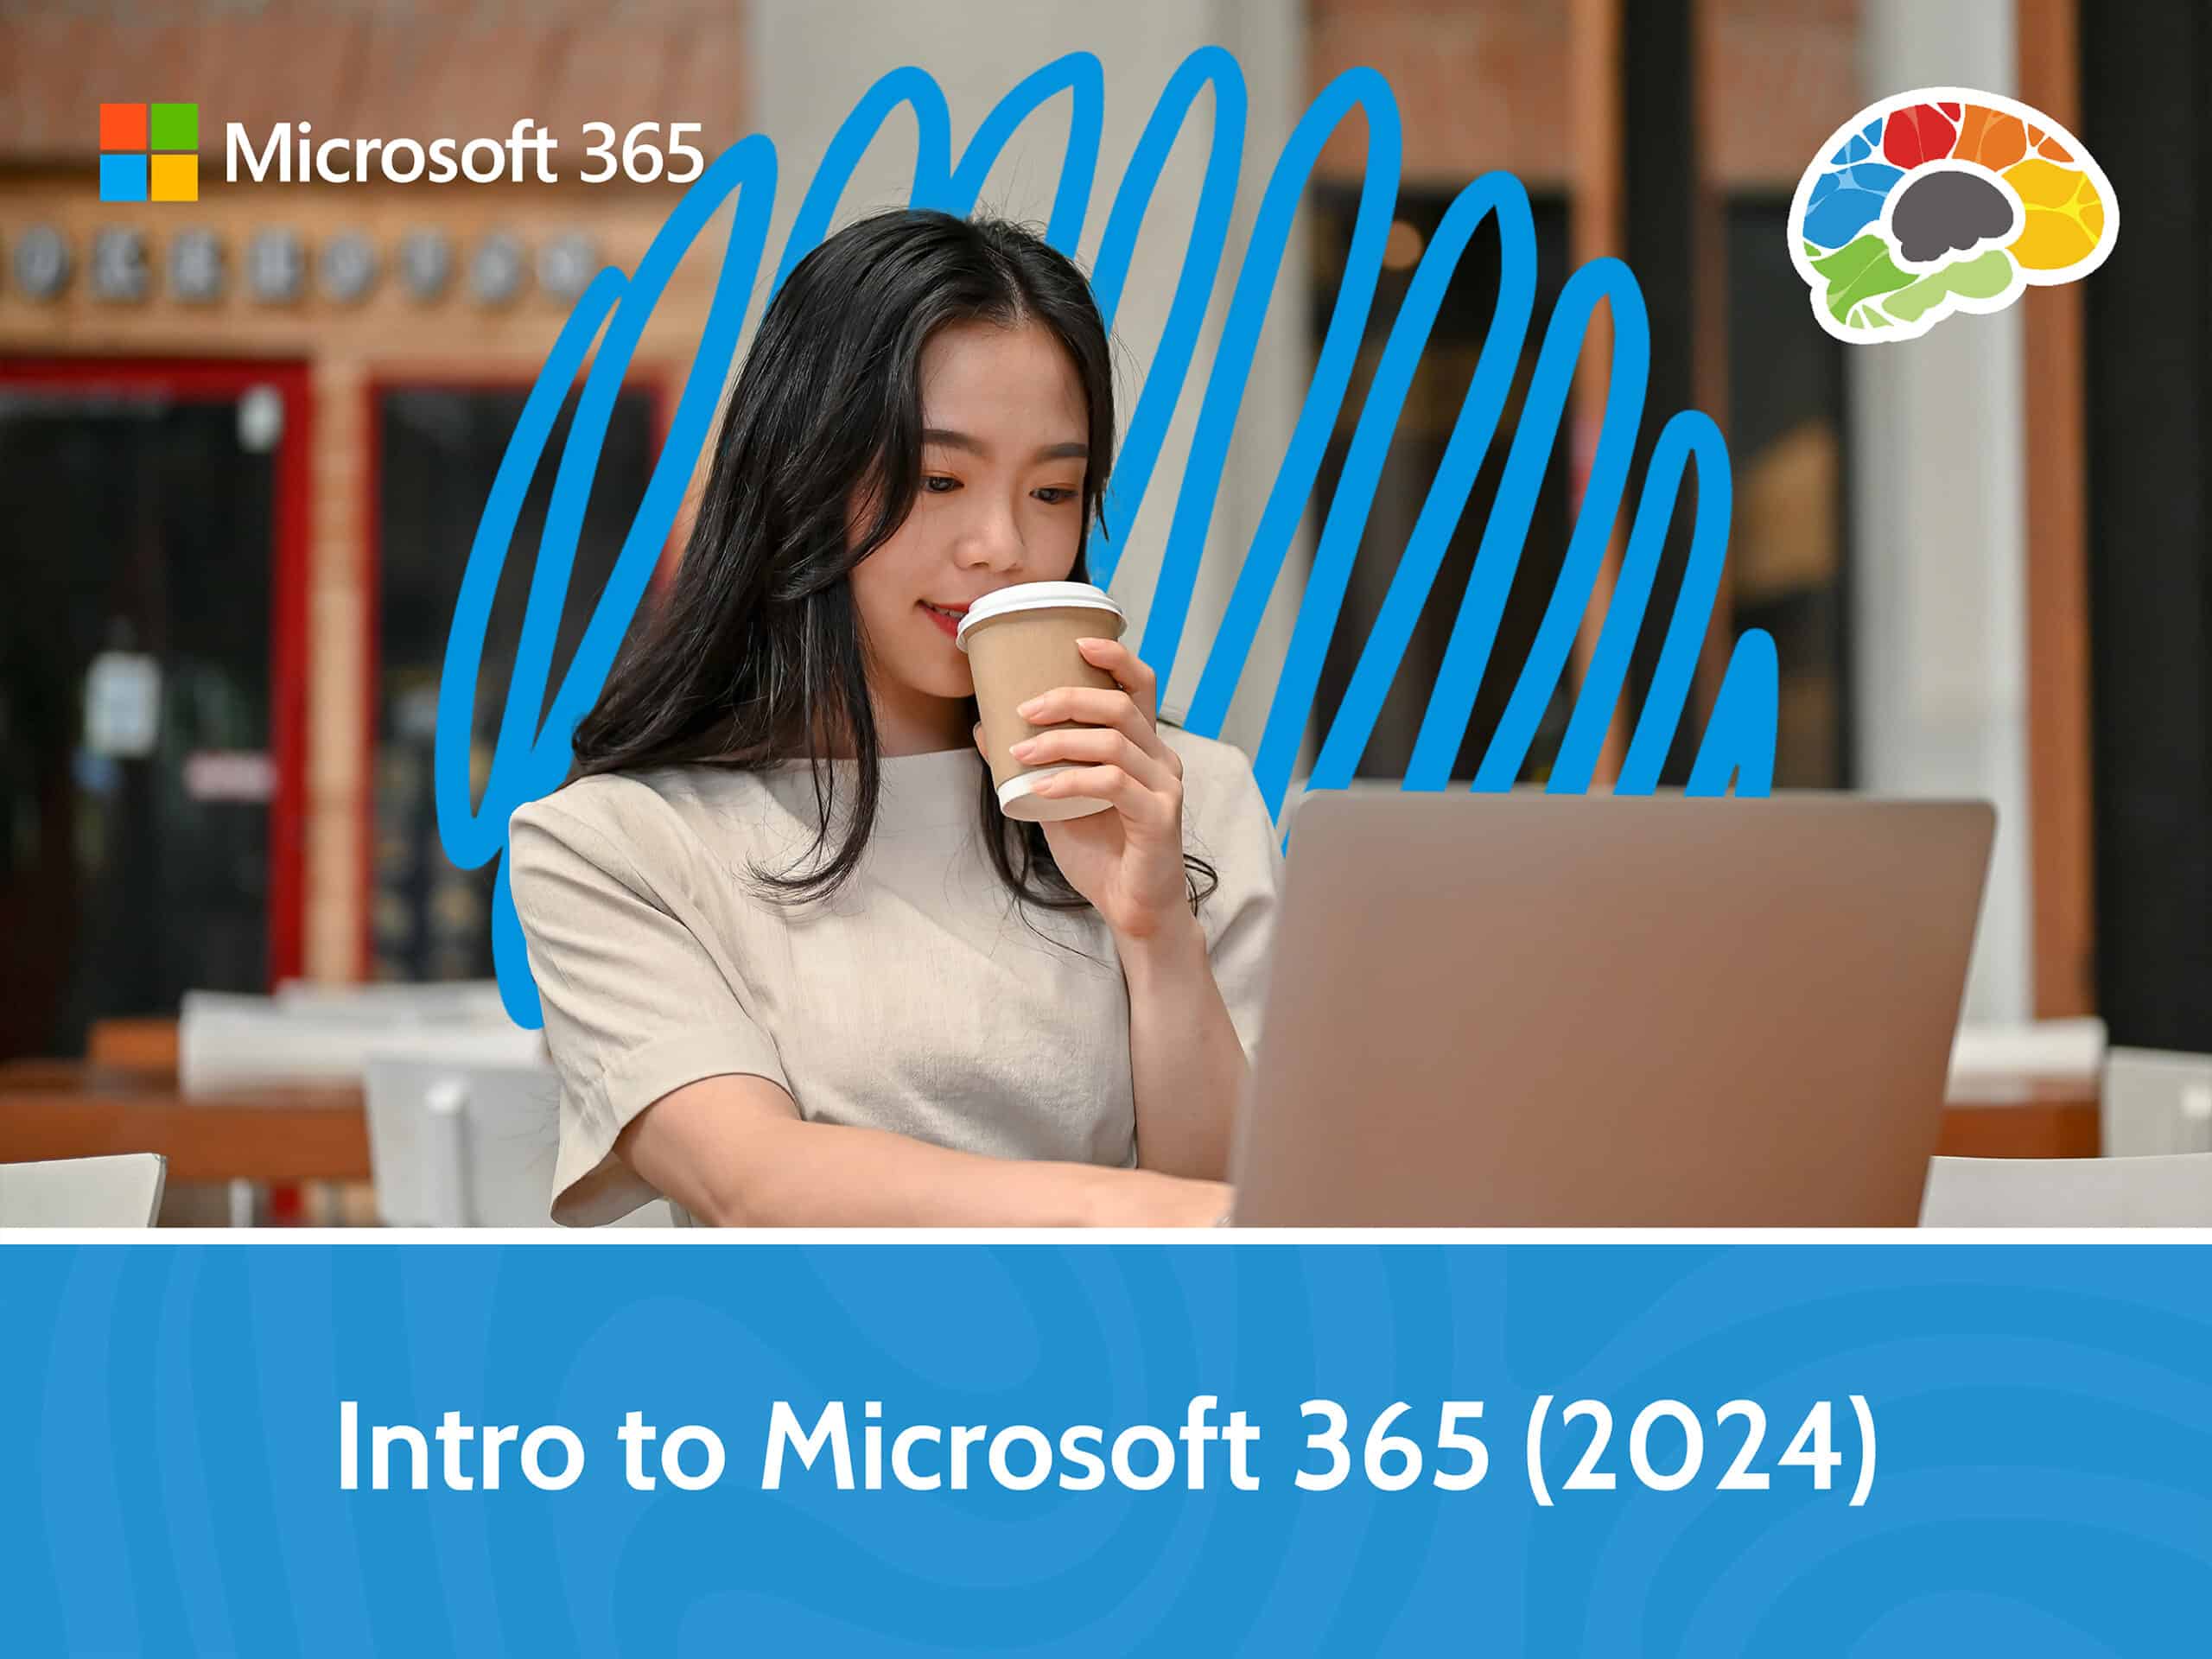 Intro to Microsoft 365 2024 scaled